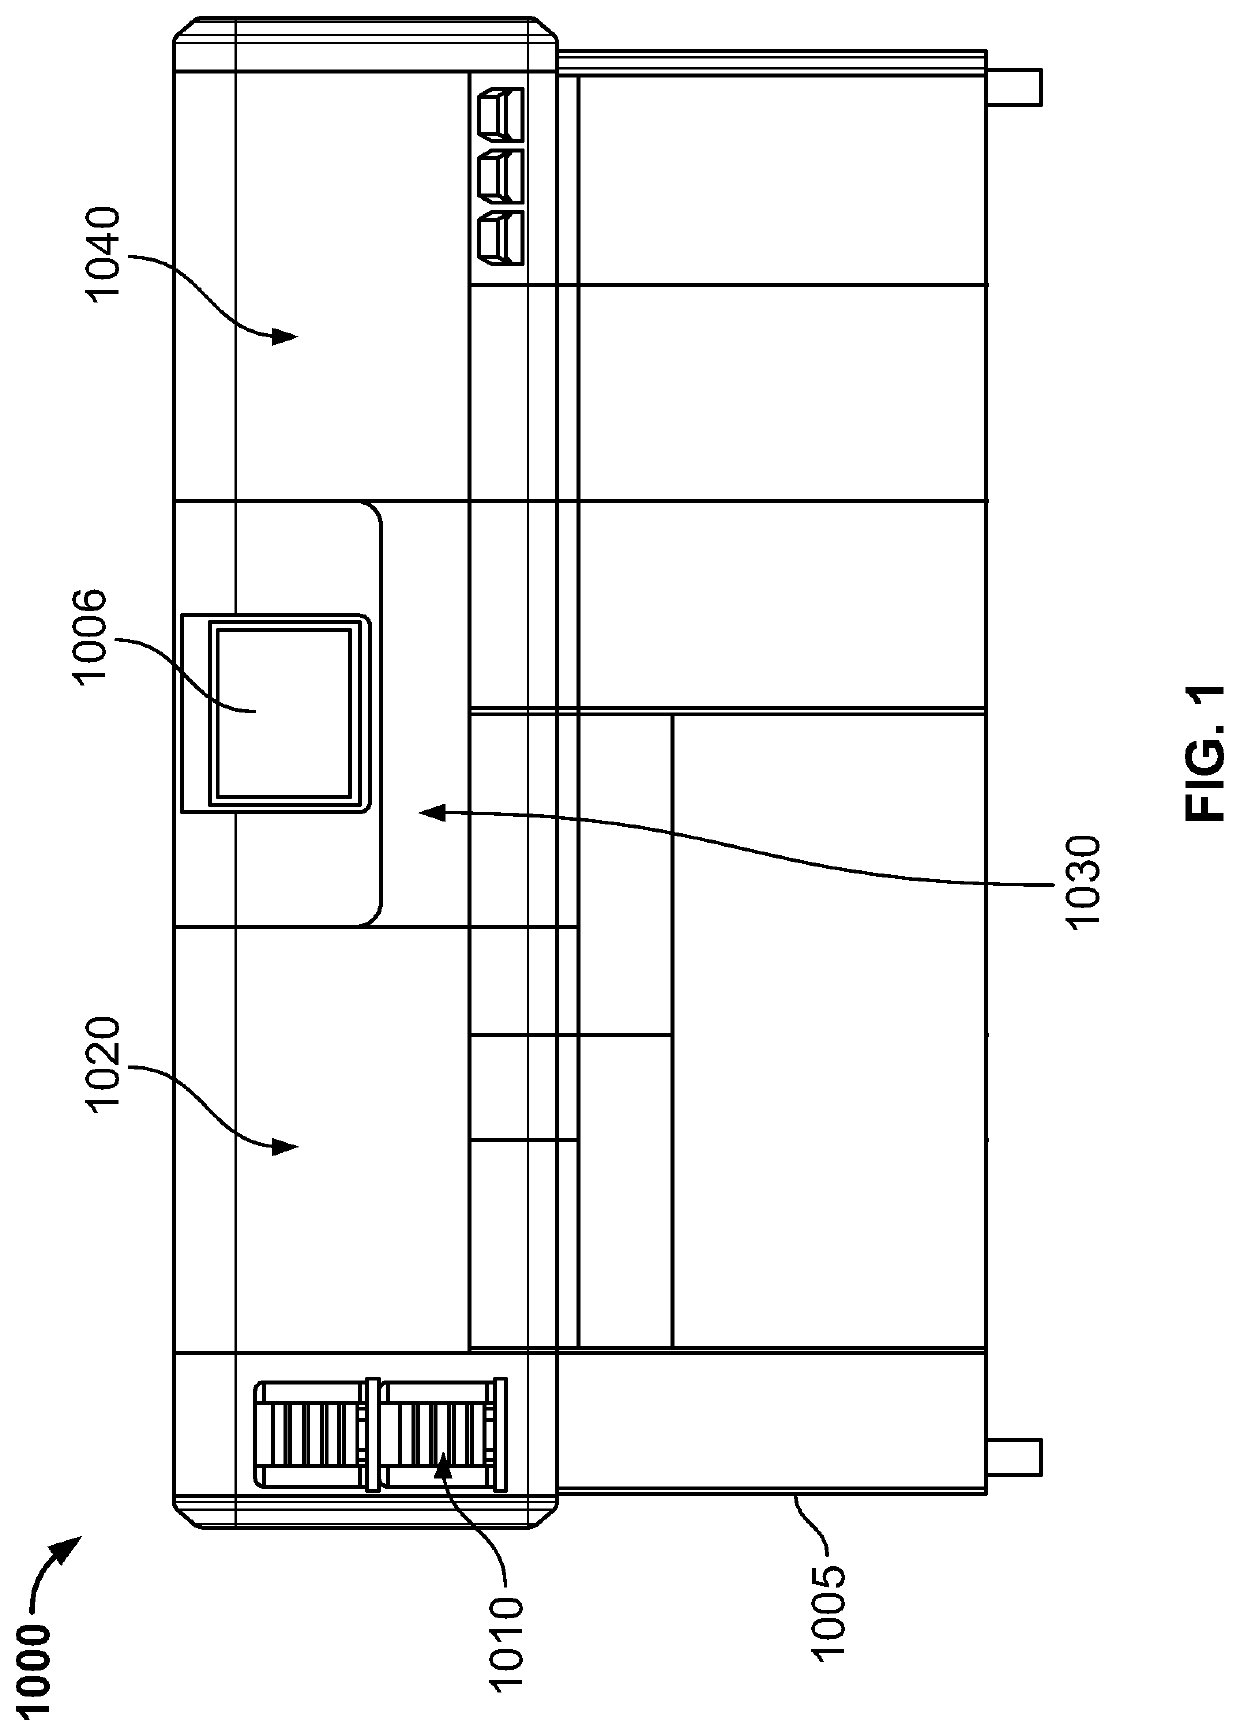 Automated method and system for obtaining and preparing microorganism sample for both identification and antibiotic susceptibility tests